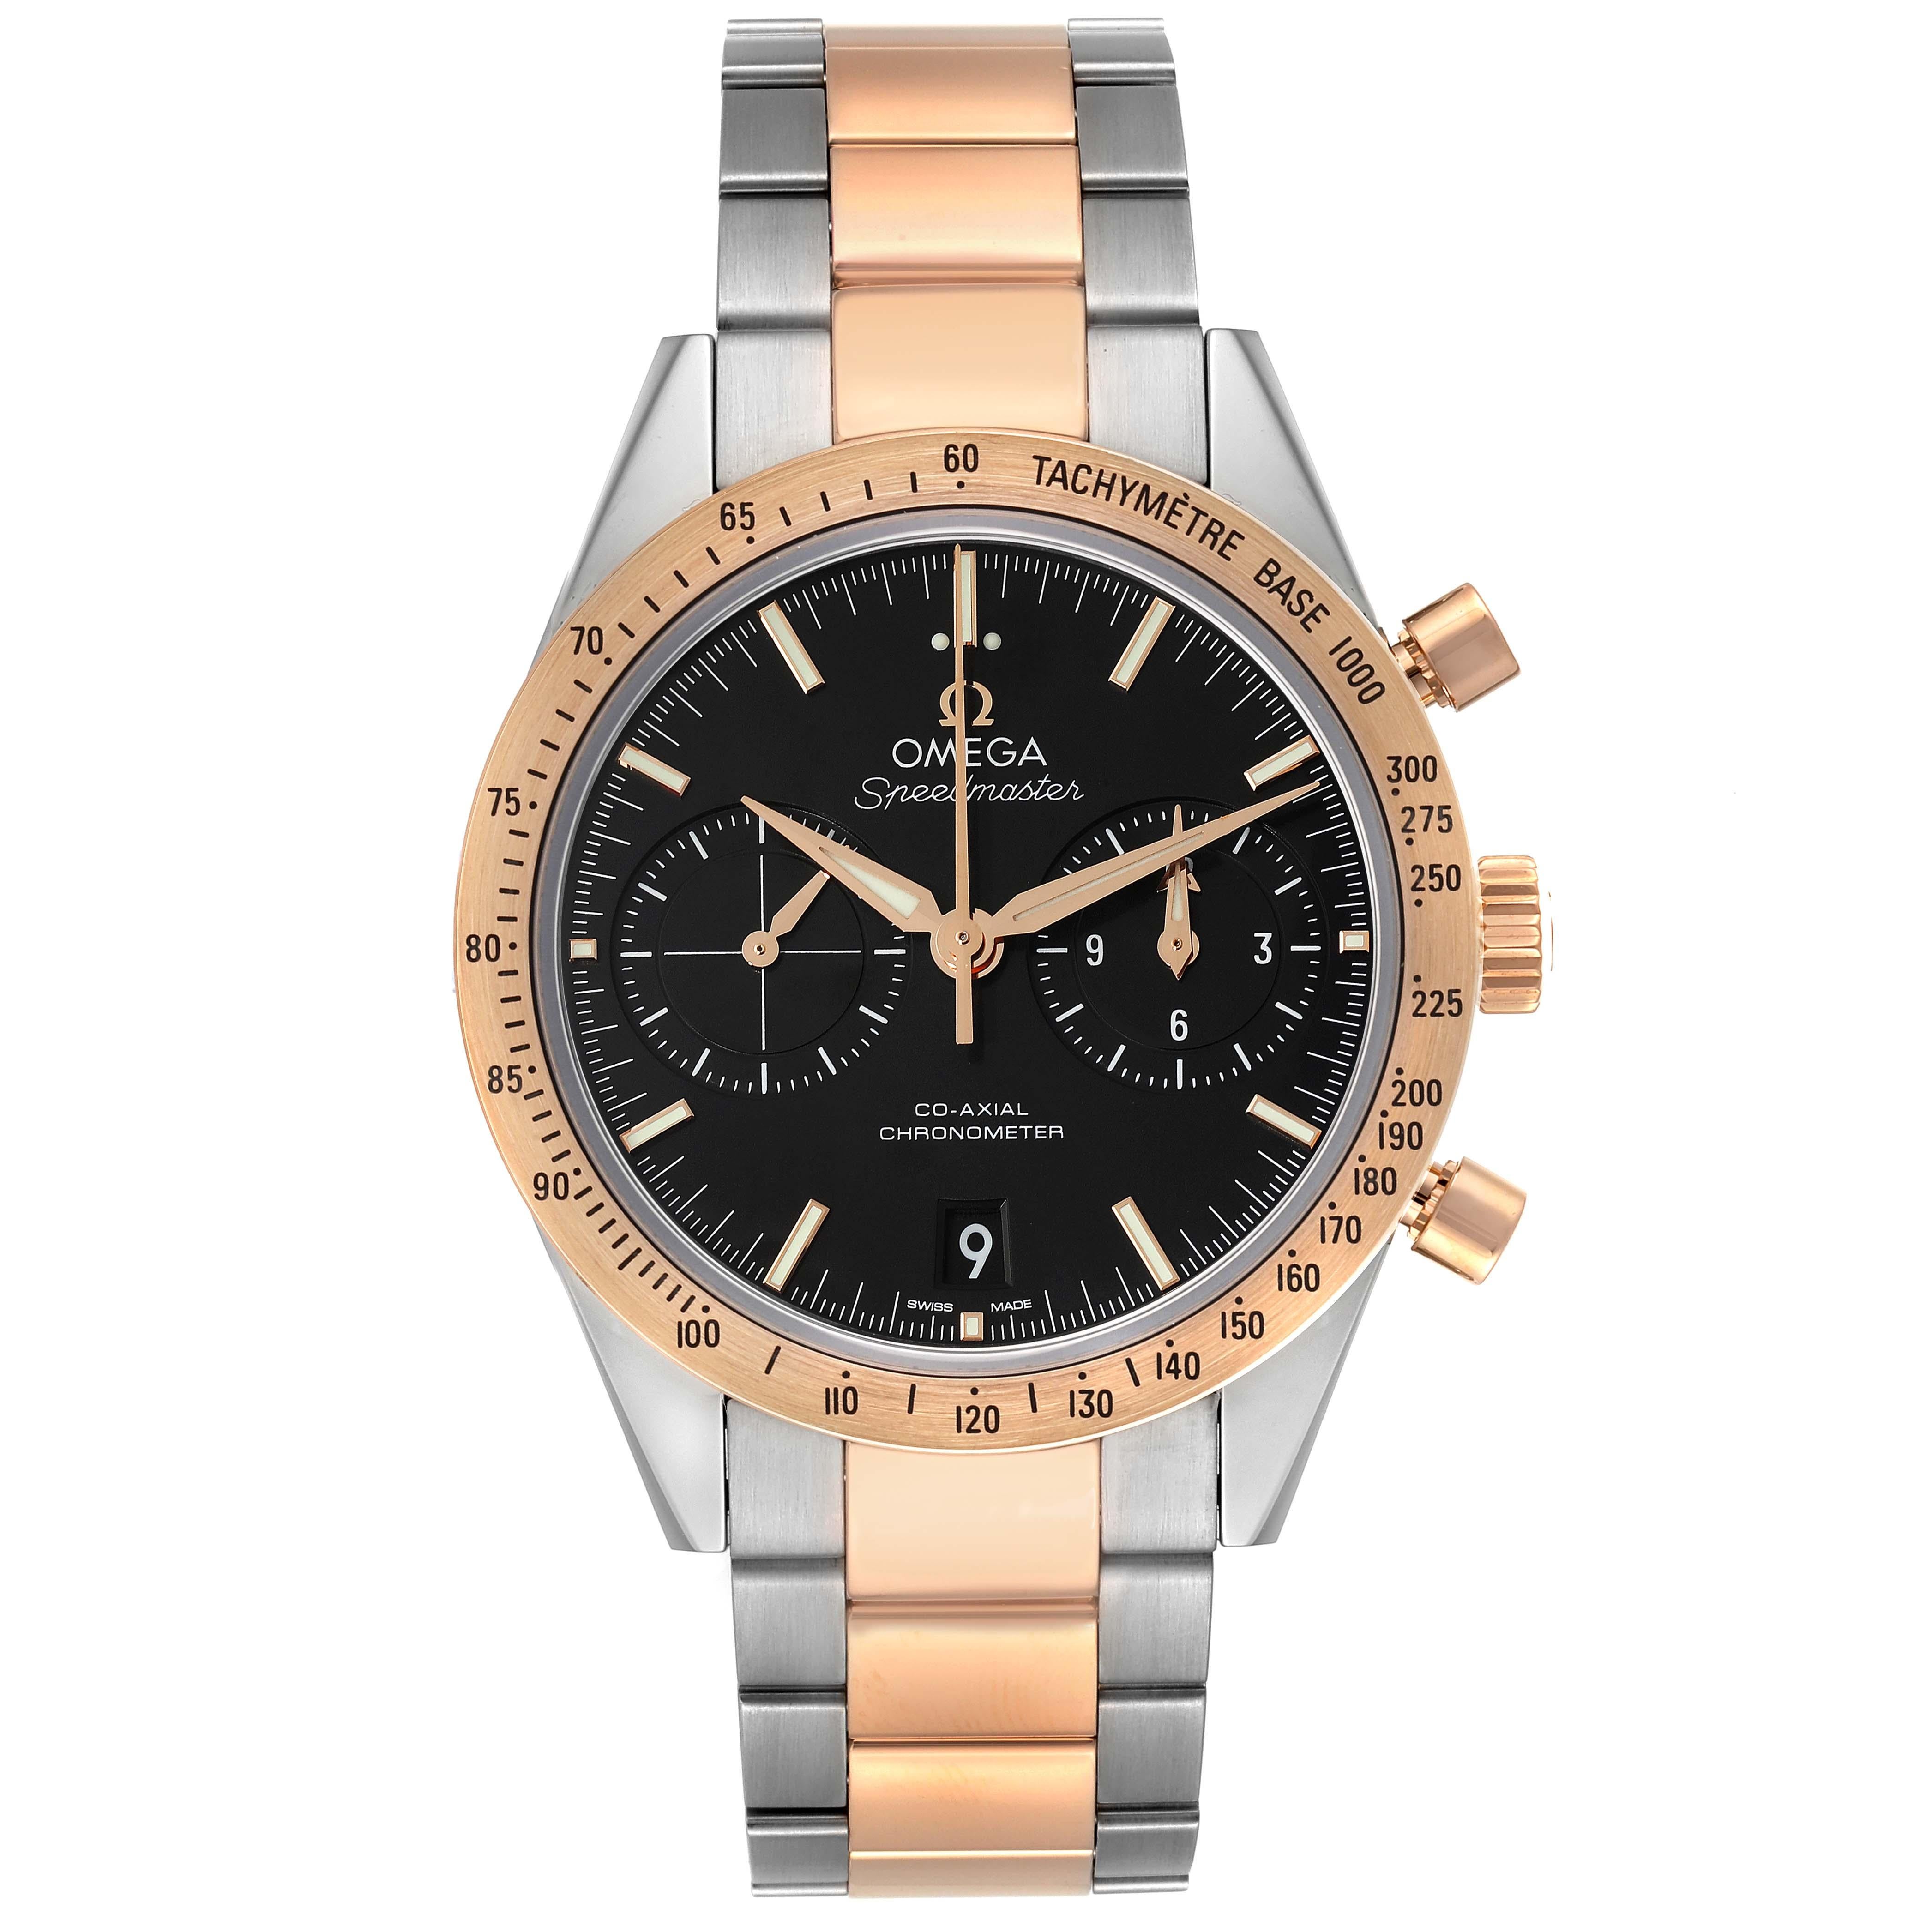 Omega Speedmaster 57 Steel Rose Gold Mens Watch 331.20.42.51.01.002 Box Card. Automatic self-winding chronograph movement with column wheel mechanism and Co-Axial escapement. Silicon balance-spring on free sprung-balance, 2 barrels mounted in